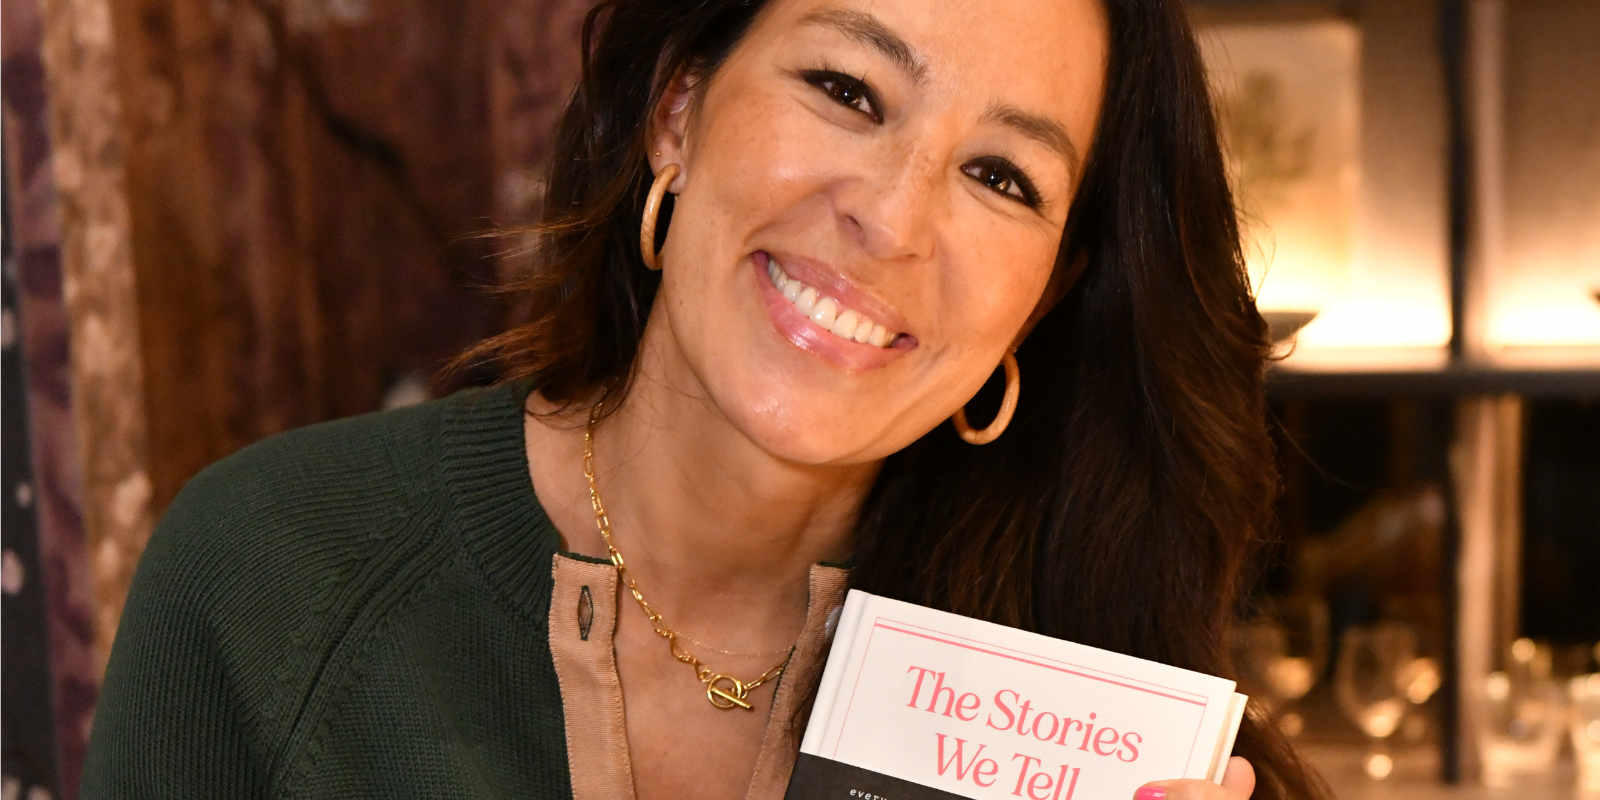 Joanna Gaines holds a copy of her book 'The Stories We Tell.'